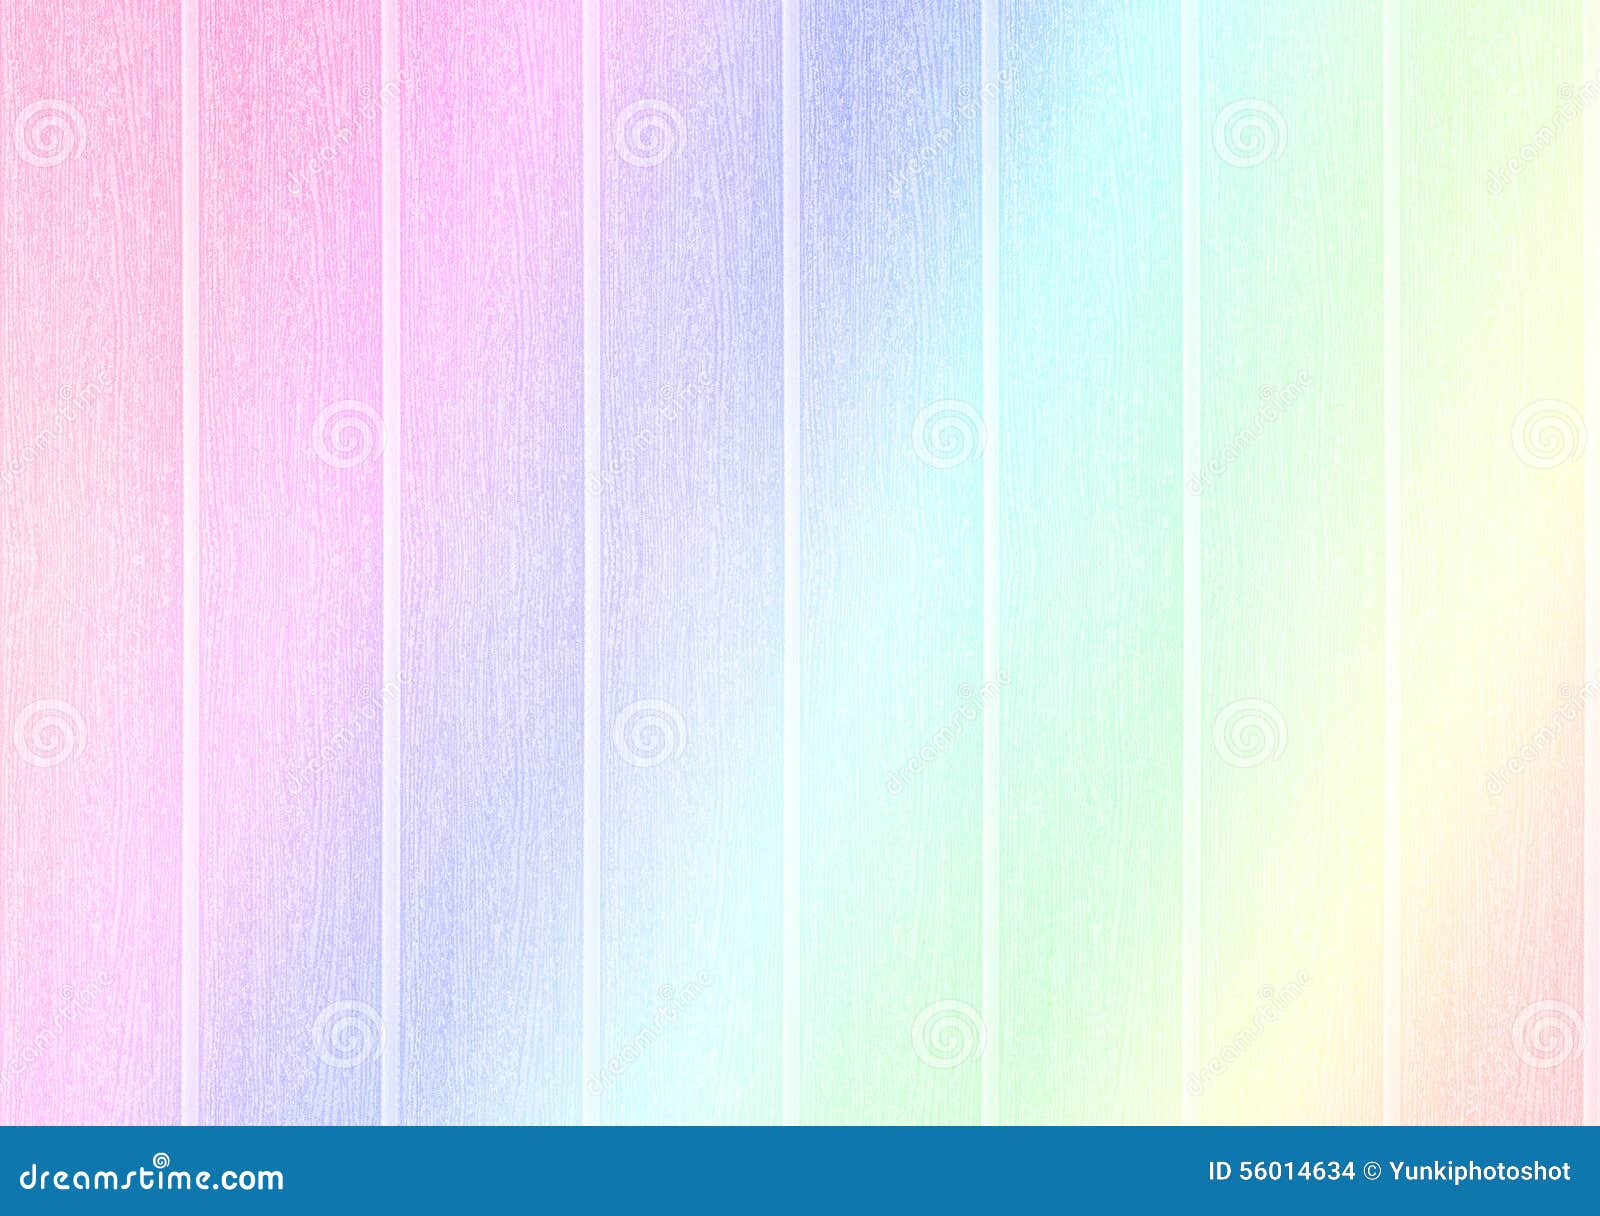 wall textured background with beautiful rainbow color filtered abstract background